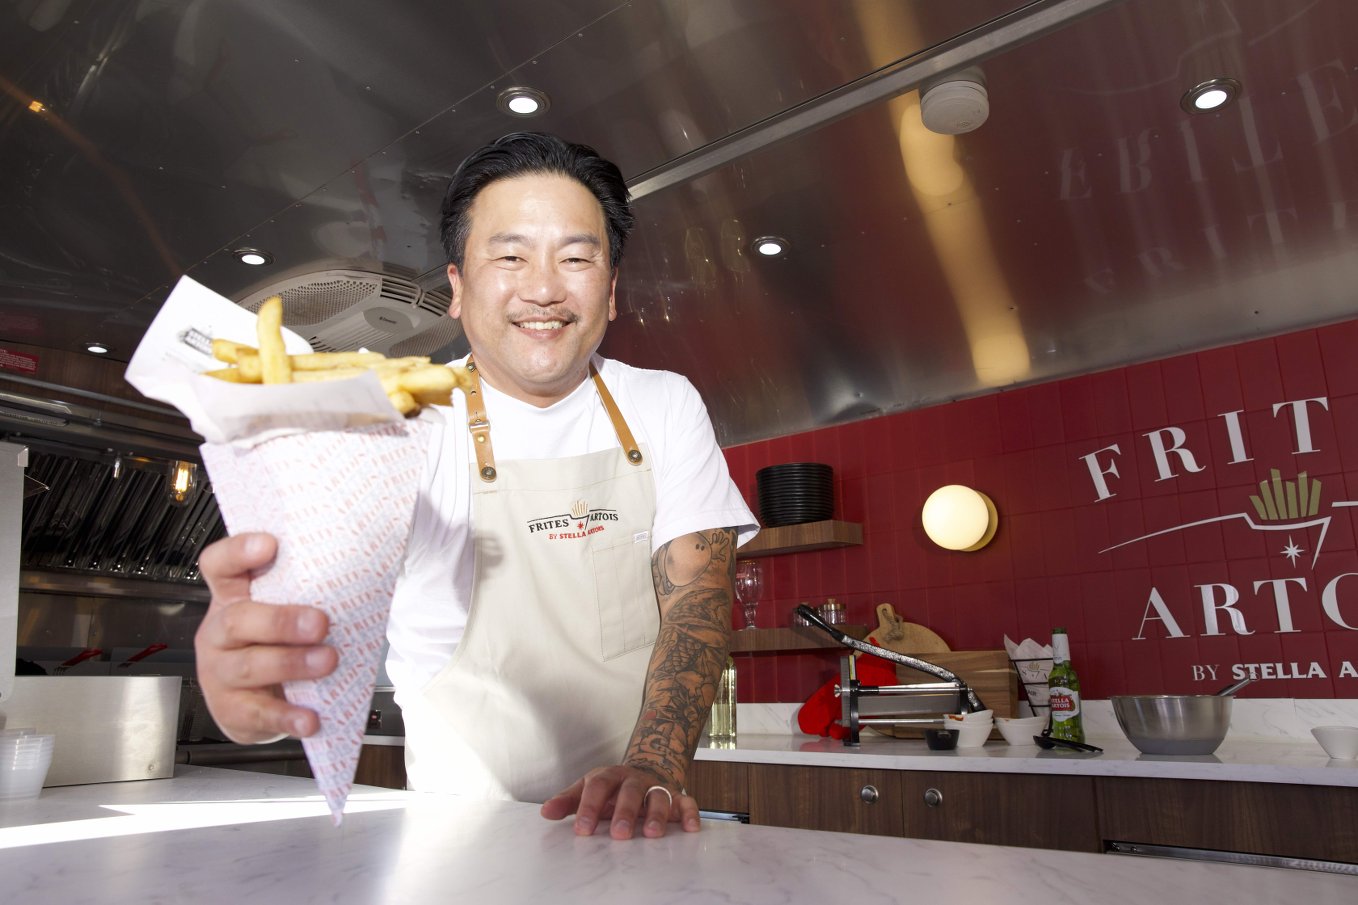 Chef Roy Choi and Frites Artois